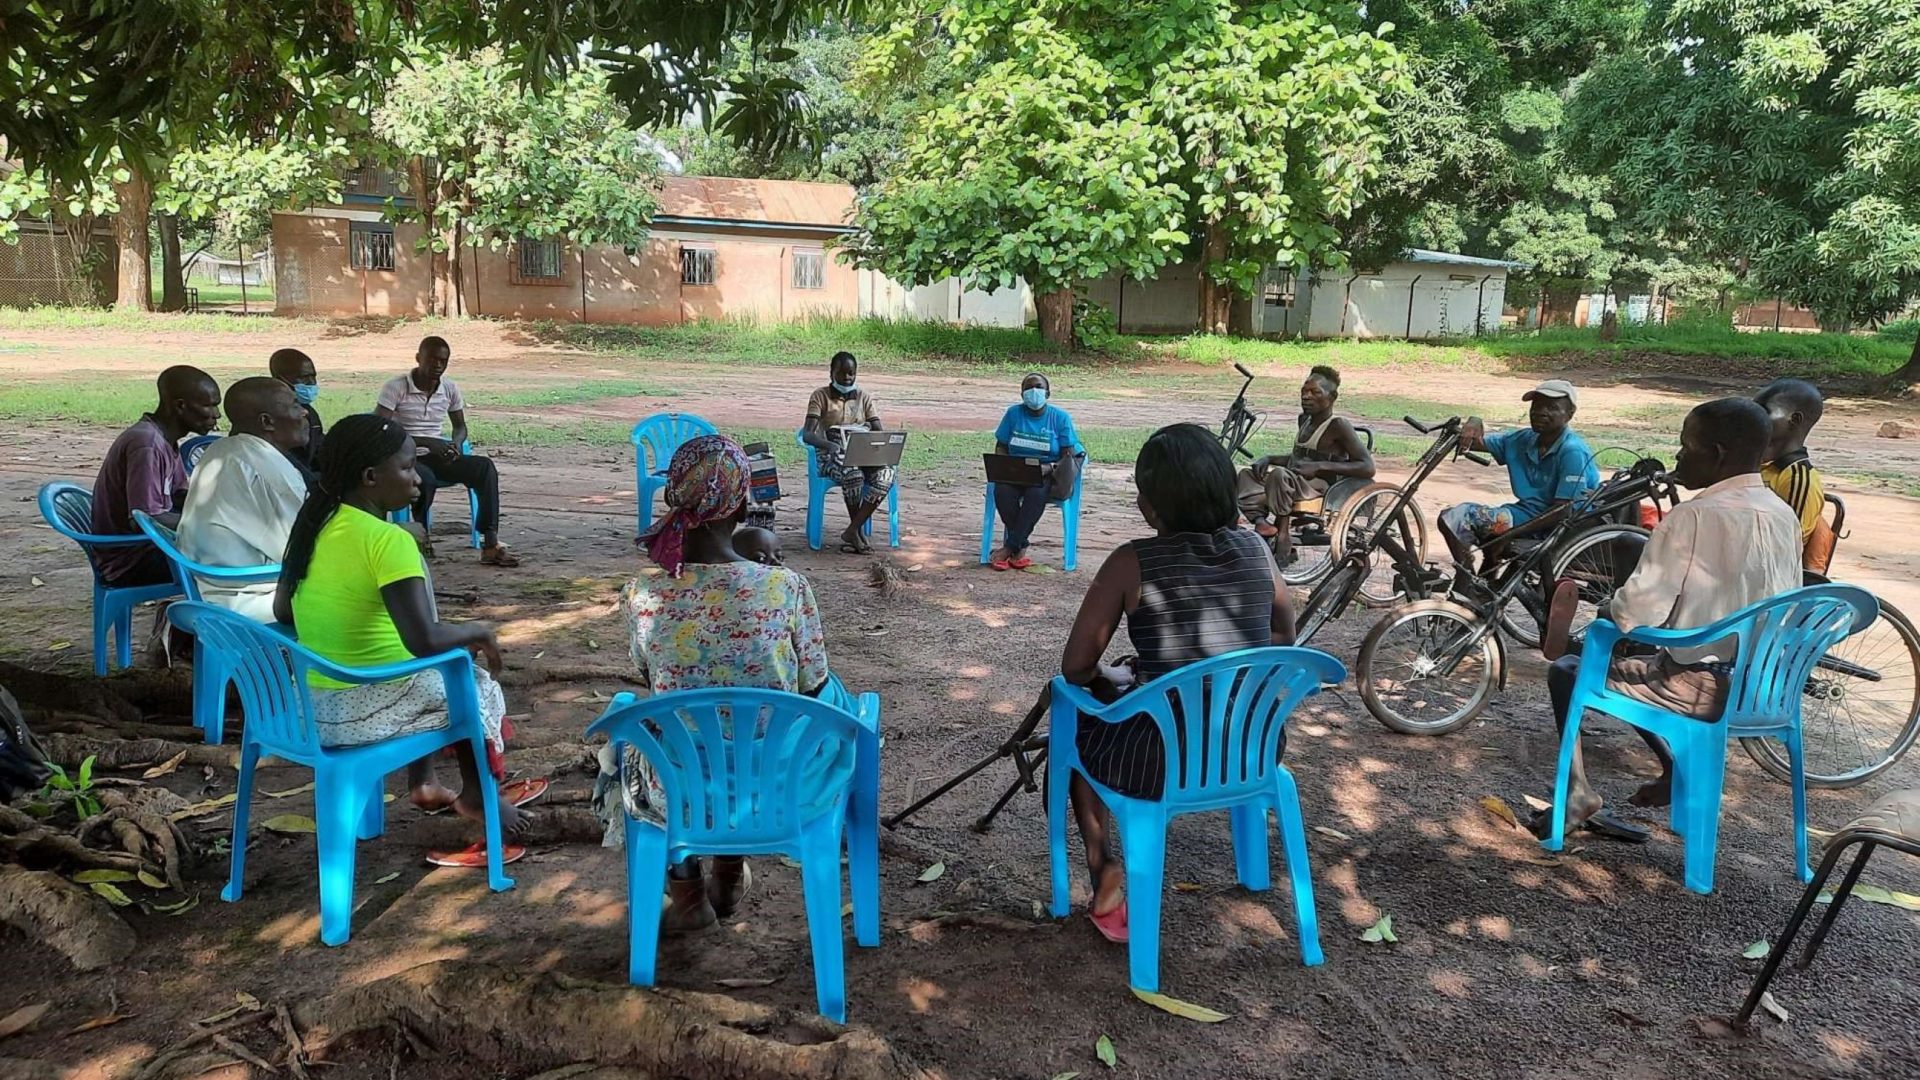 Cover photo of the South Sudan field report. Shows a group of people sitting together.